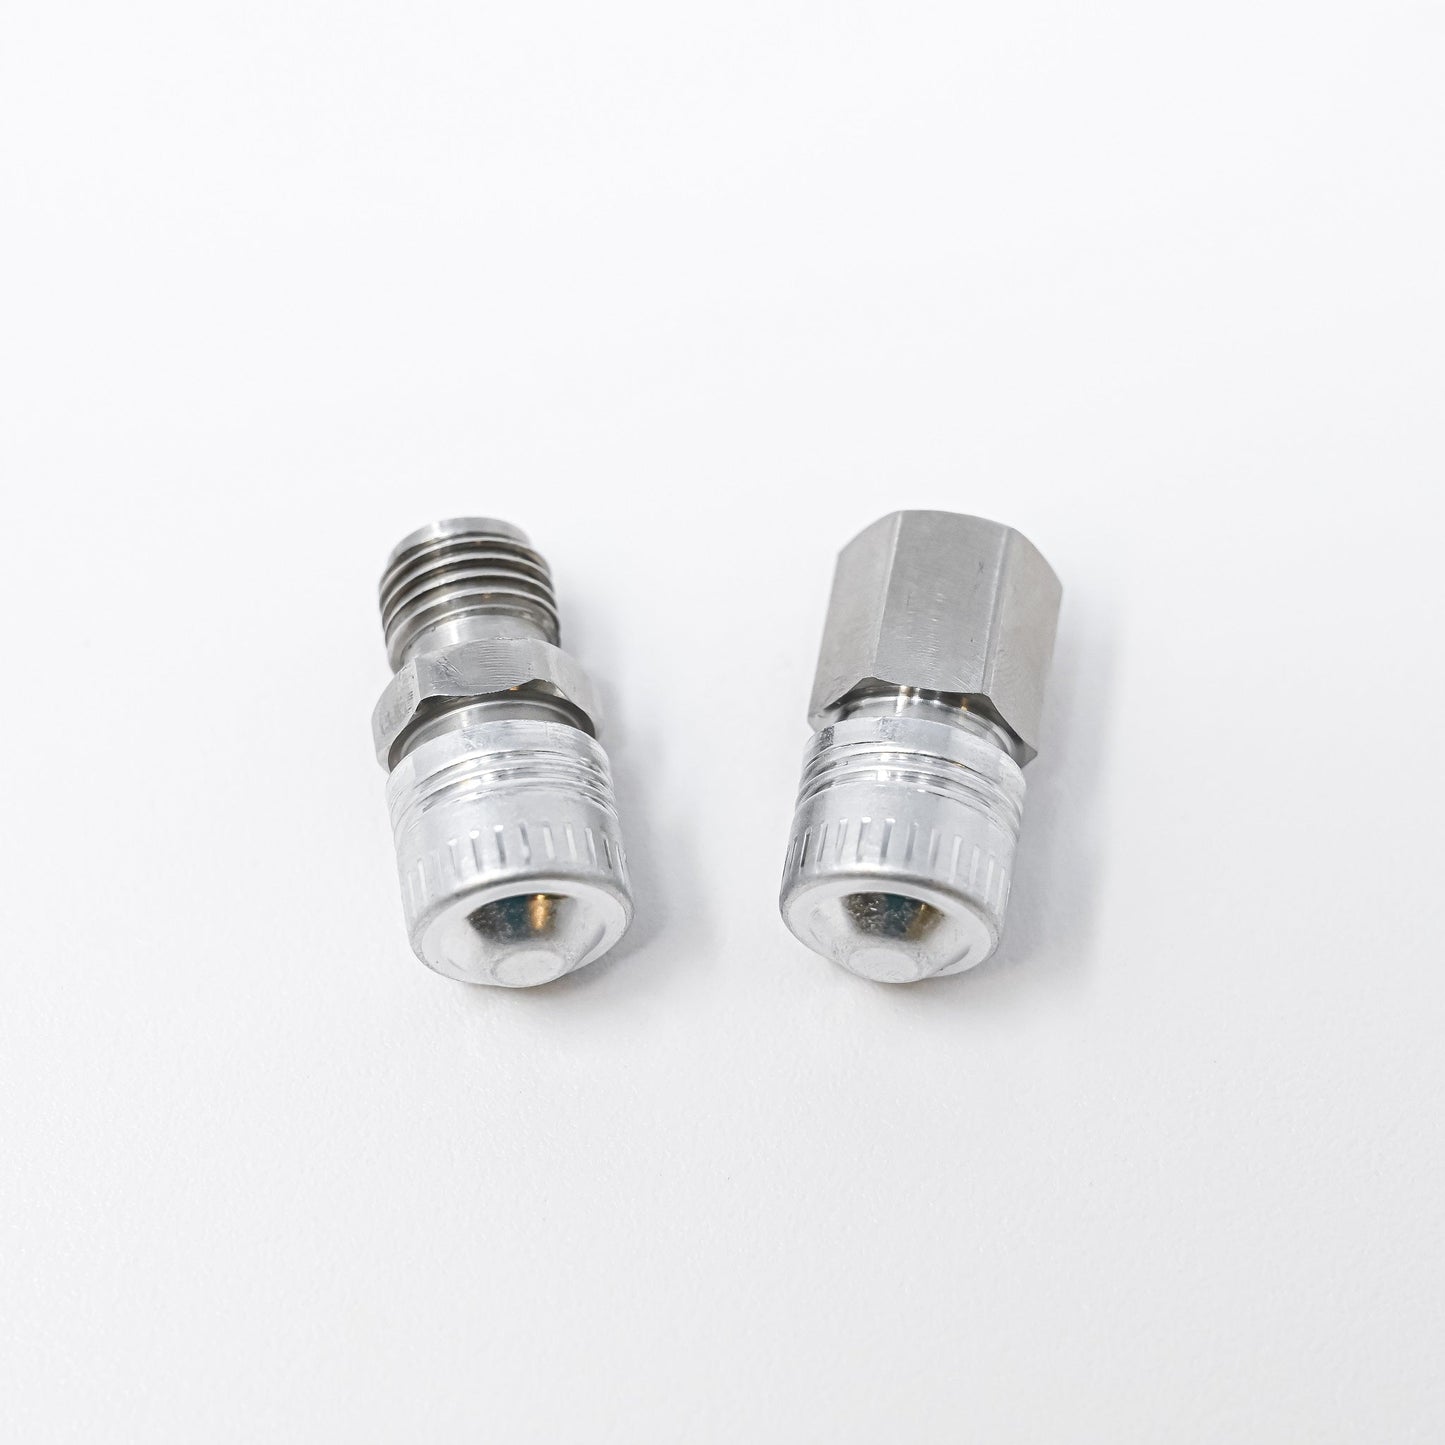 Two piece stainless steel check valve.